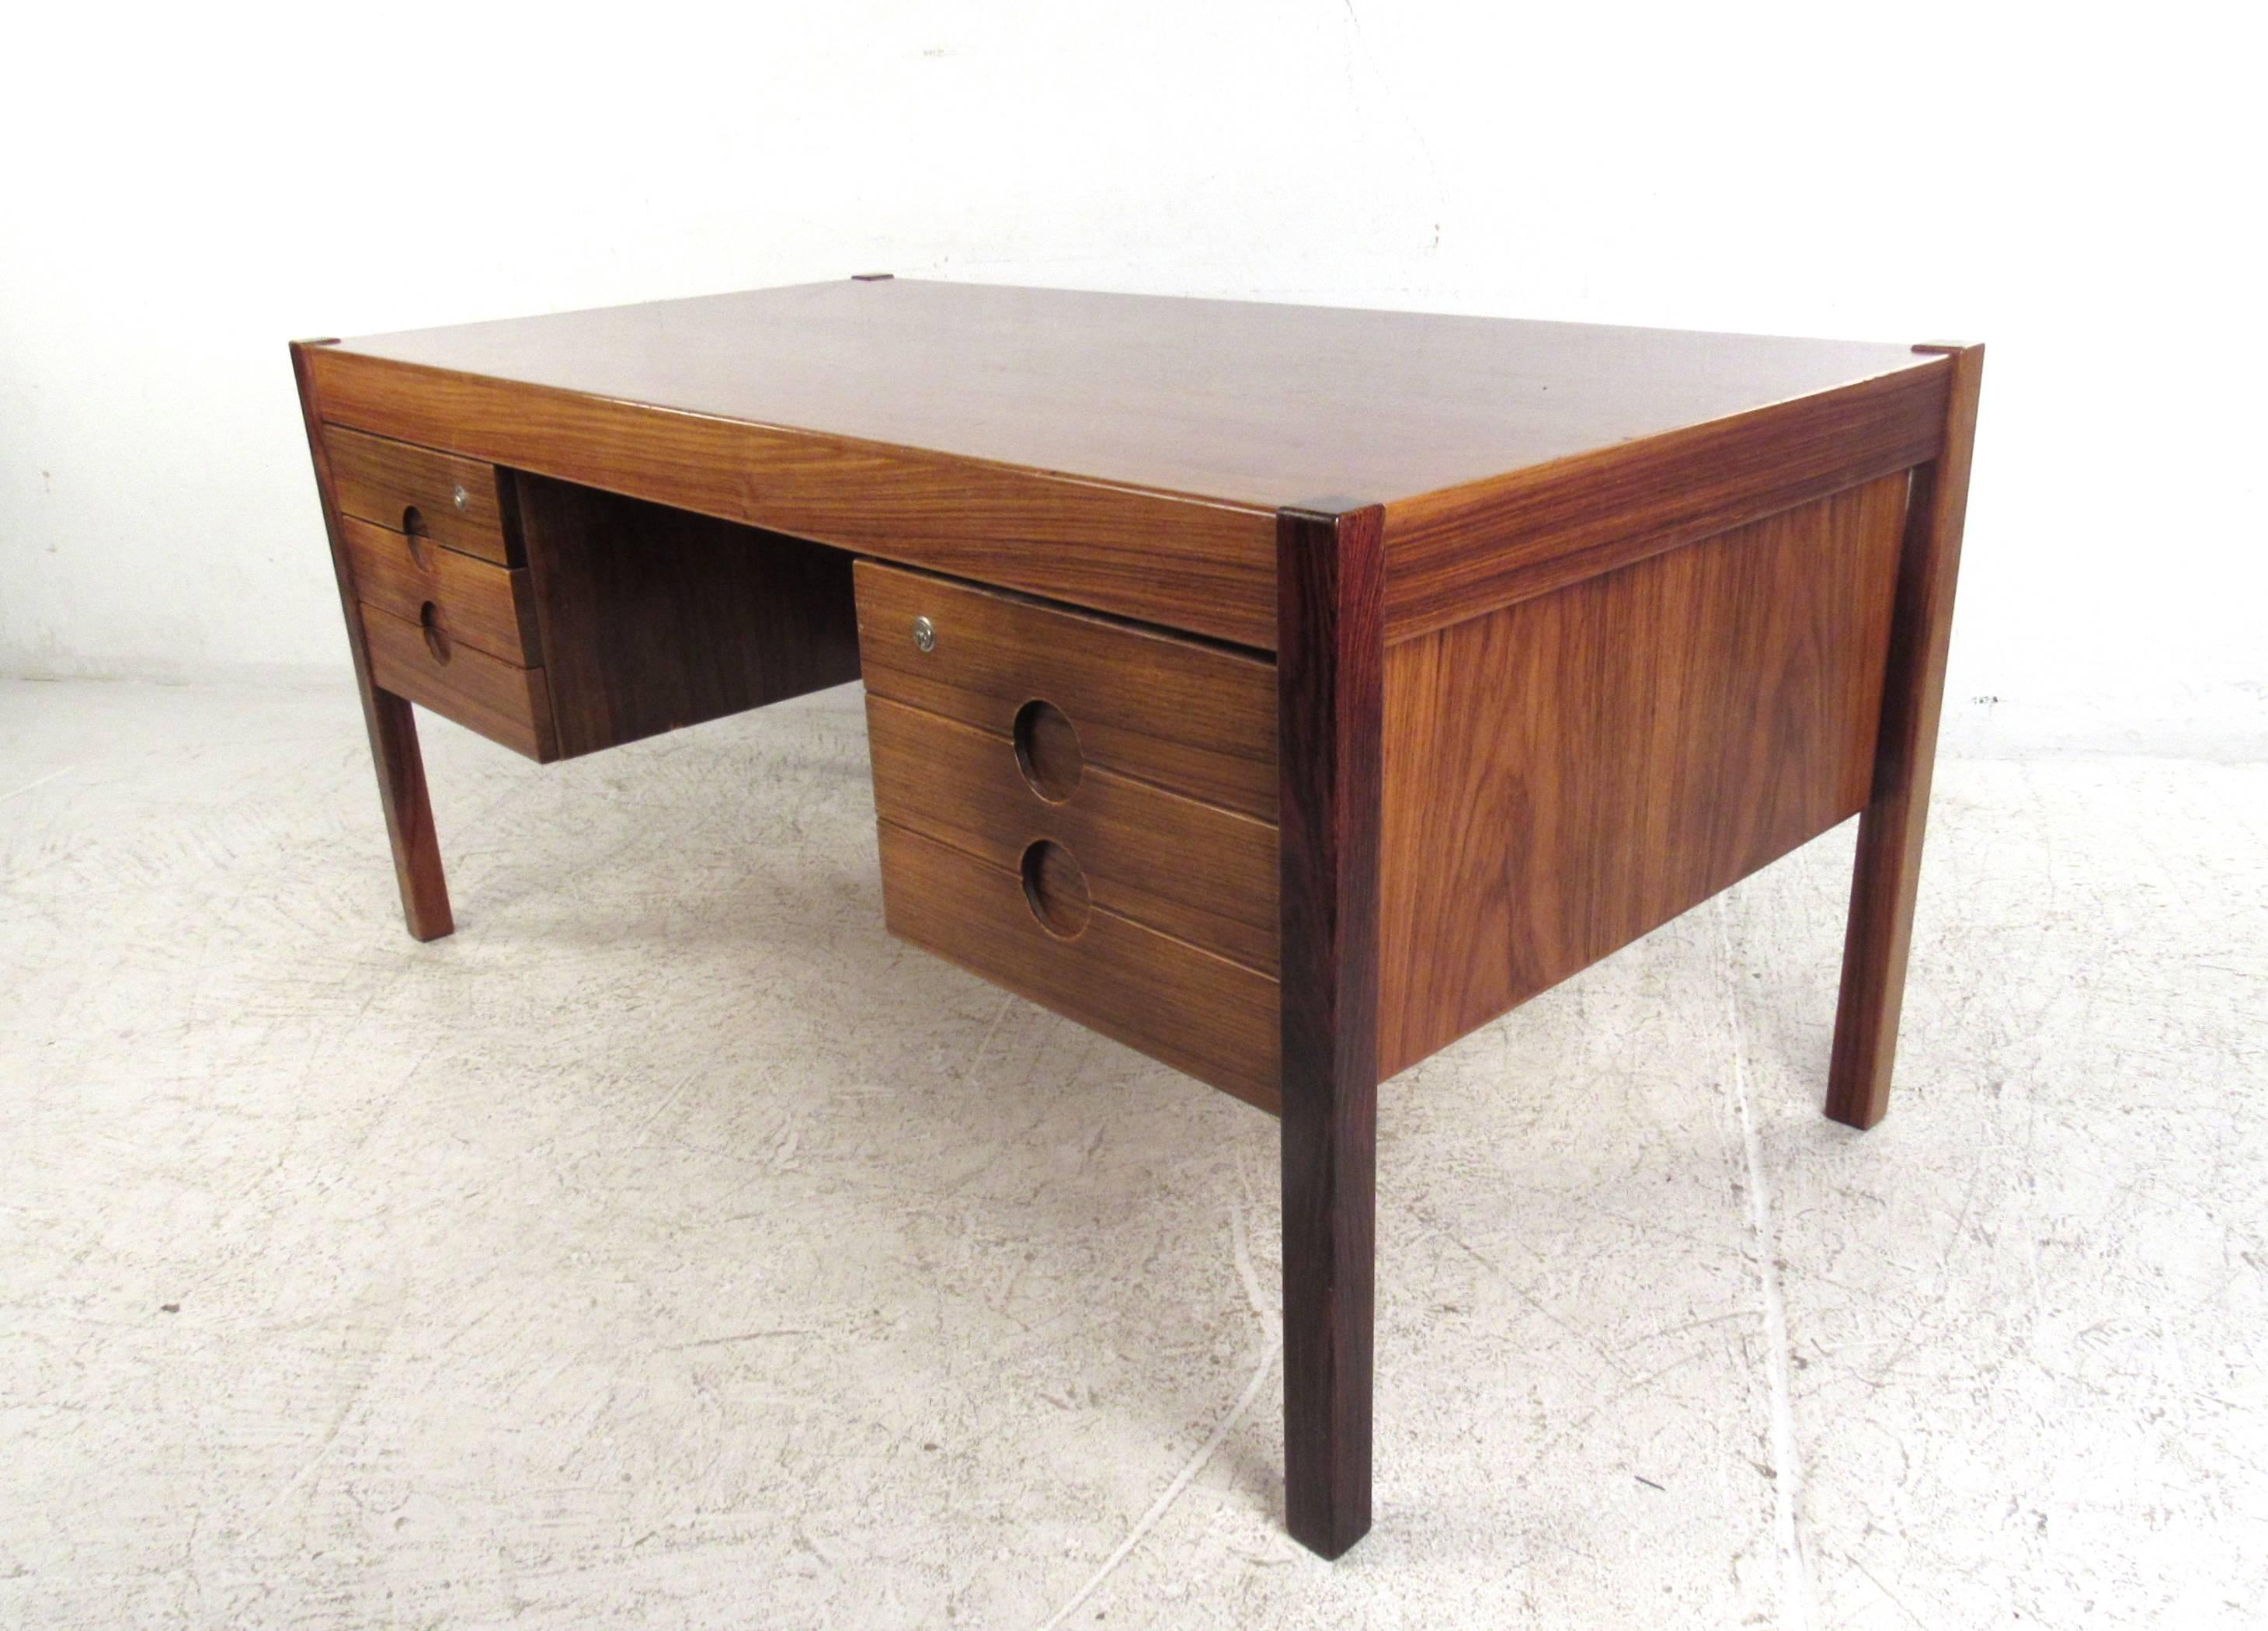 This unique Indian rosewood desk by Mid-Century Danish designer Christian Linneberg makes a stylish and unique workplace for any interior. Double-sided desk features ample drawer space for storage as well as a rear side shelf for display. Please